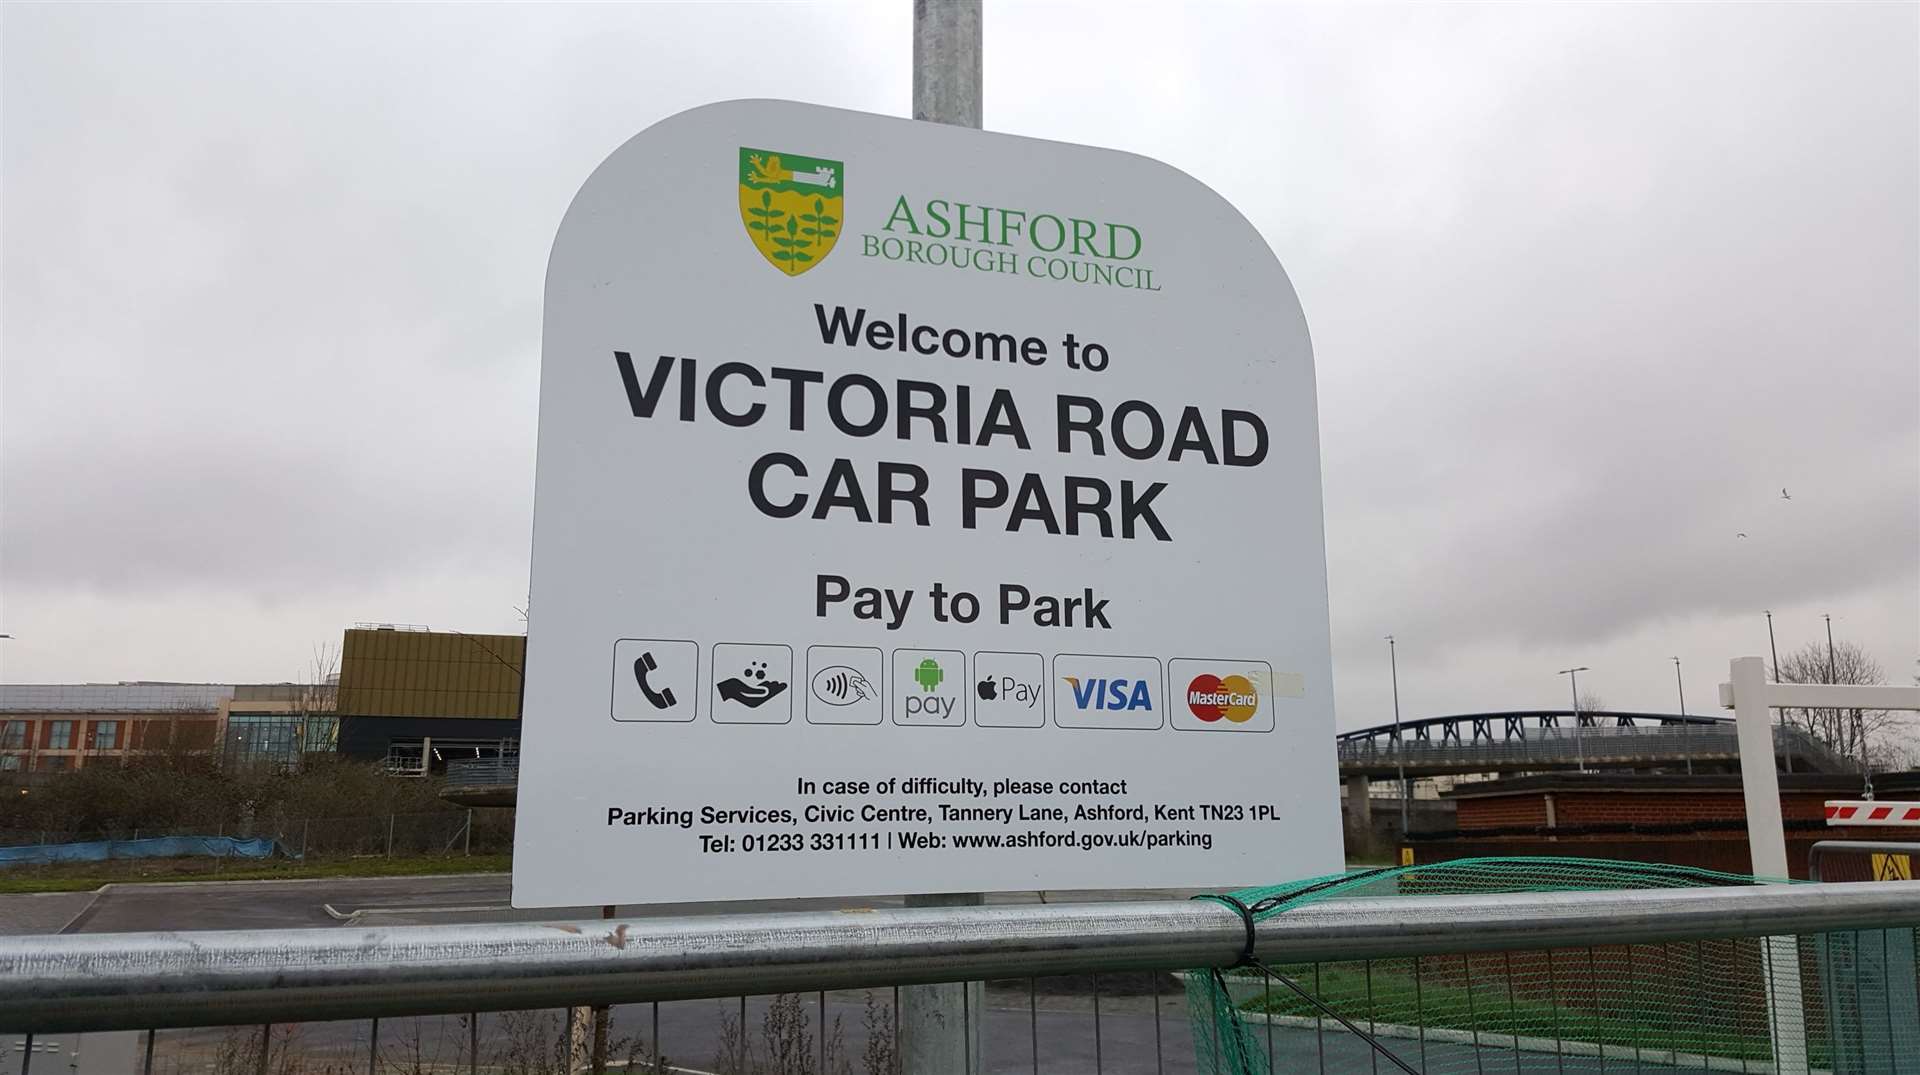 The Victoria Road car park is just over the train tracks from the Elwick Place leisure complex and opened in February